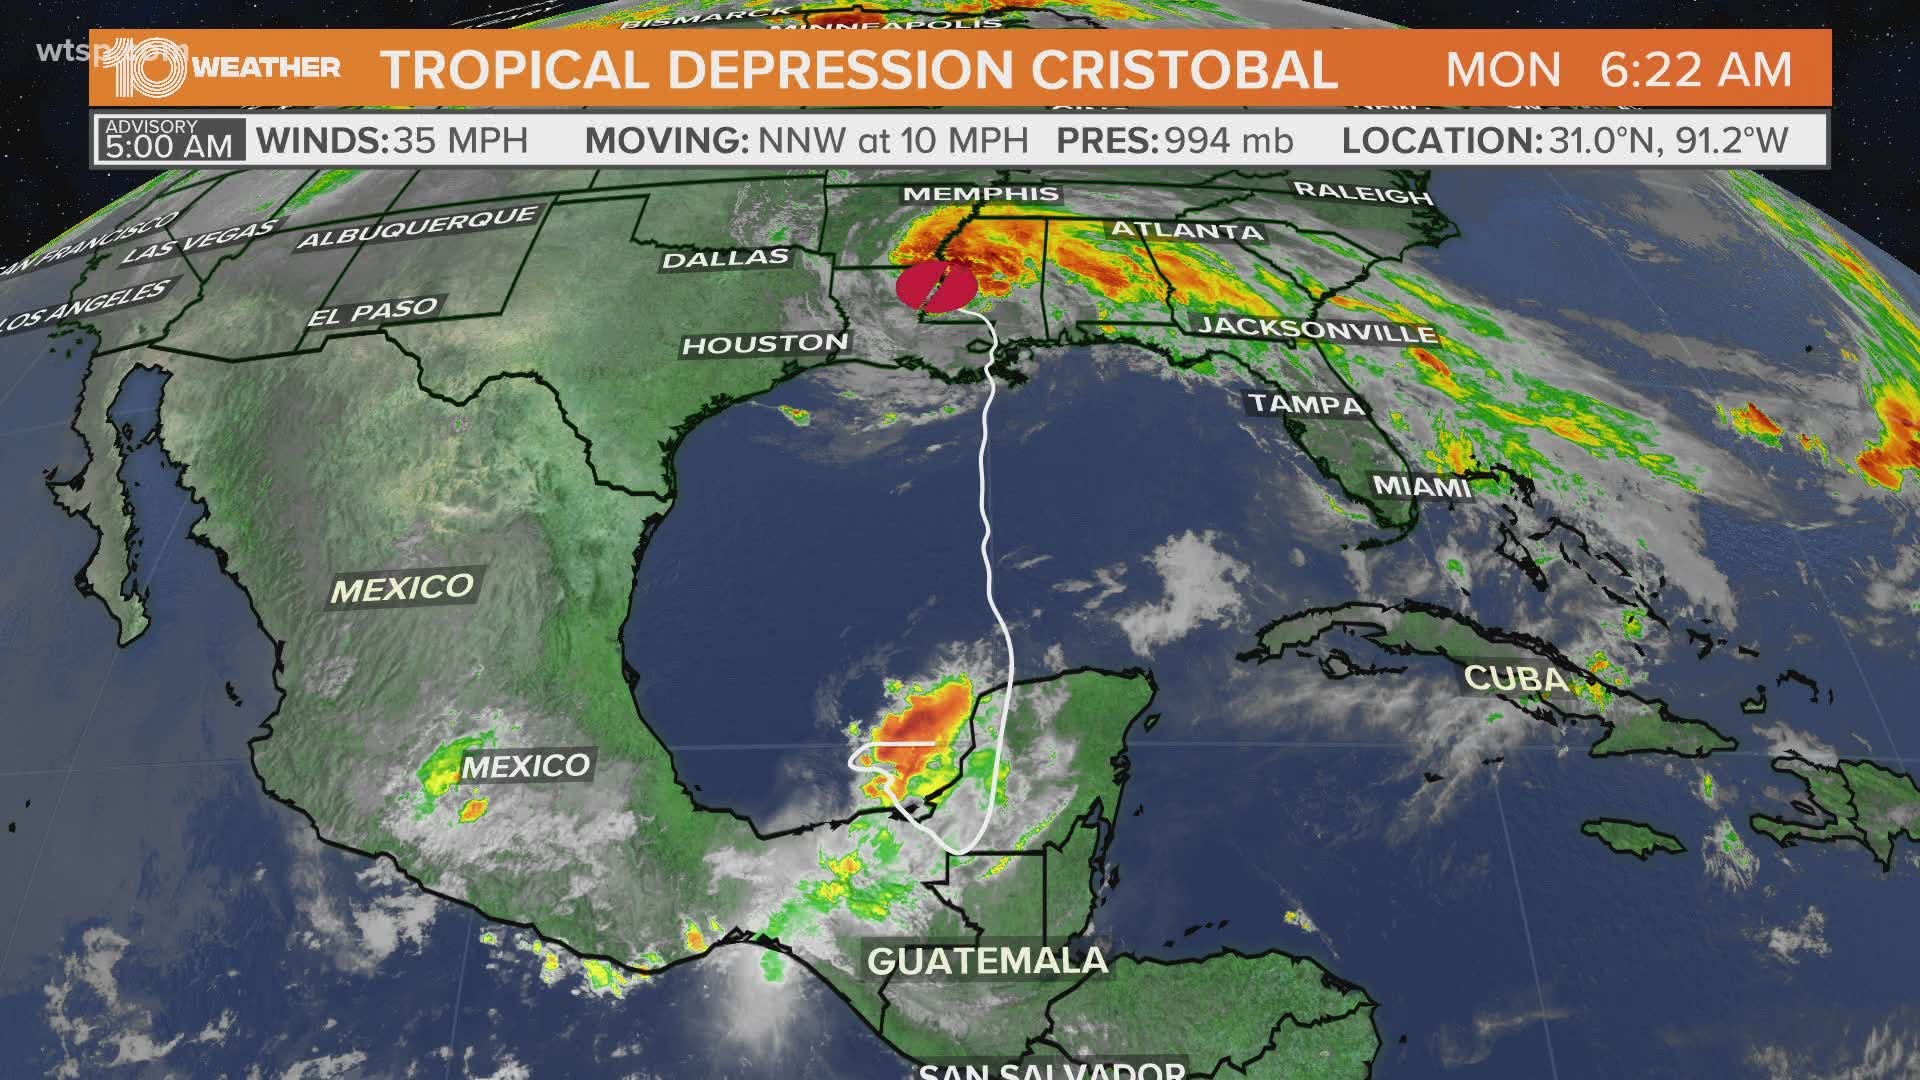 Tropical Storm Cristobal made landfall in Louisiana Sunday and then weakened to a tropical depression.